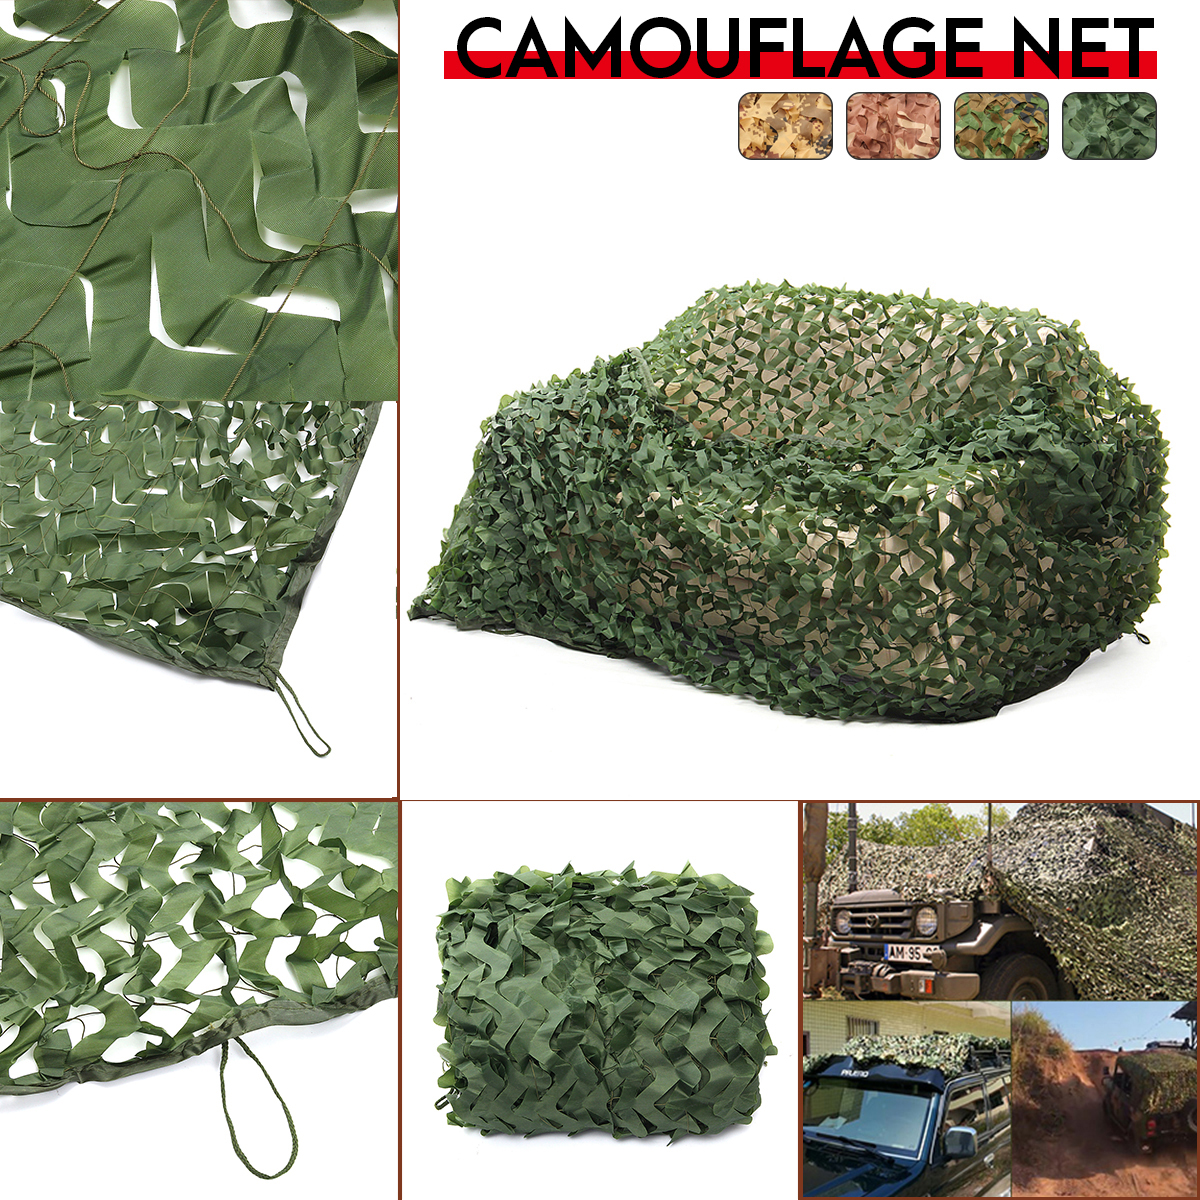 Multi-Size Army Green Camo Netting Camouflage Net for Car Cover Camping Woodland Military Hunting